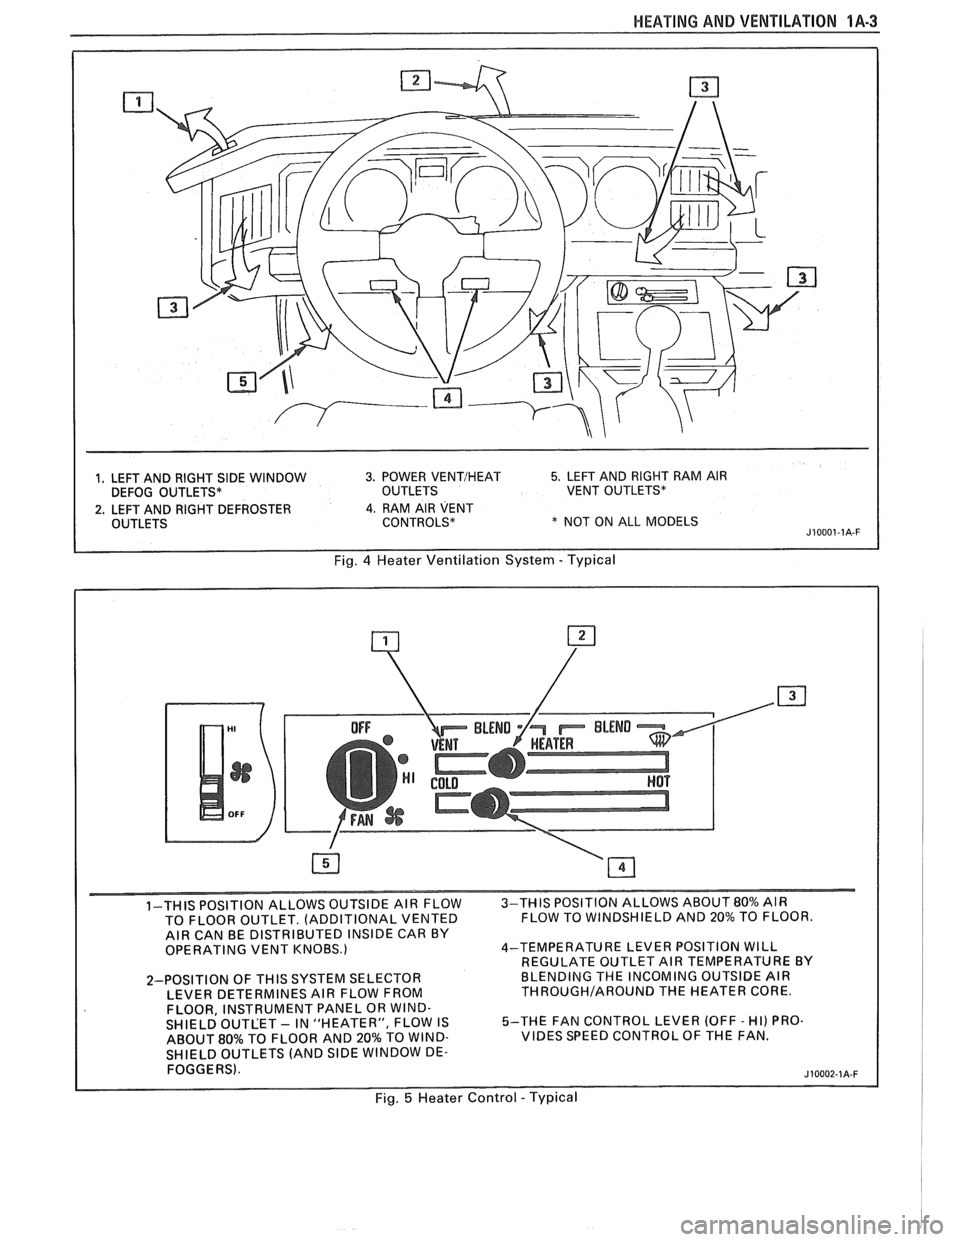 PONTIAC FIERO 1988  Service Owners Manual 
HEAPING AND VENTILA"T0N 1A-3 
1, LEFT AND RIGHT SIDE WINDOW 3. POWER VENTIHEAT 5. LEFT AND  RIGHT  RAM AIR 
DEFOG  OUTLETS*  OUTLETS VENT OUTLETS* 
2. LEFT AND  RIGHT  DEFROSTER 4. RAM AIR VENT 
OUTL